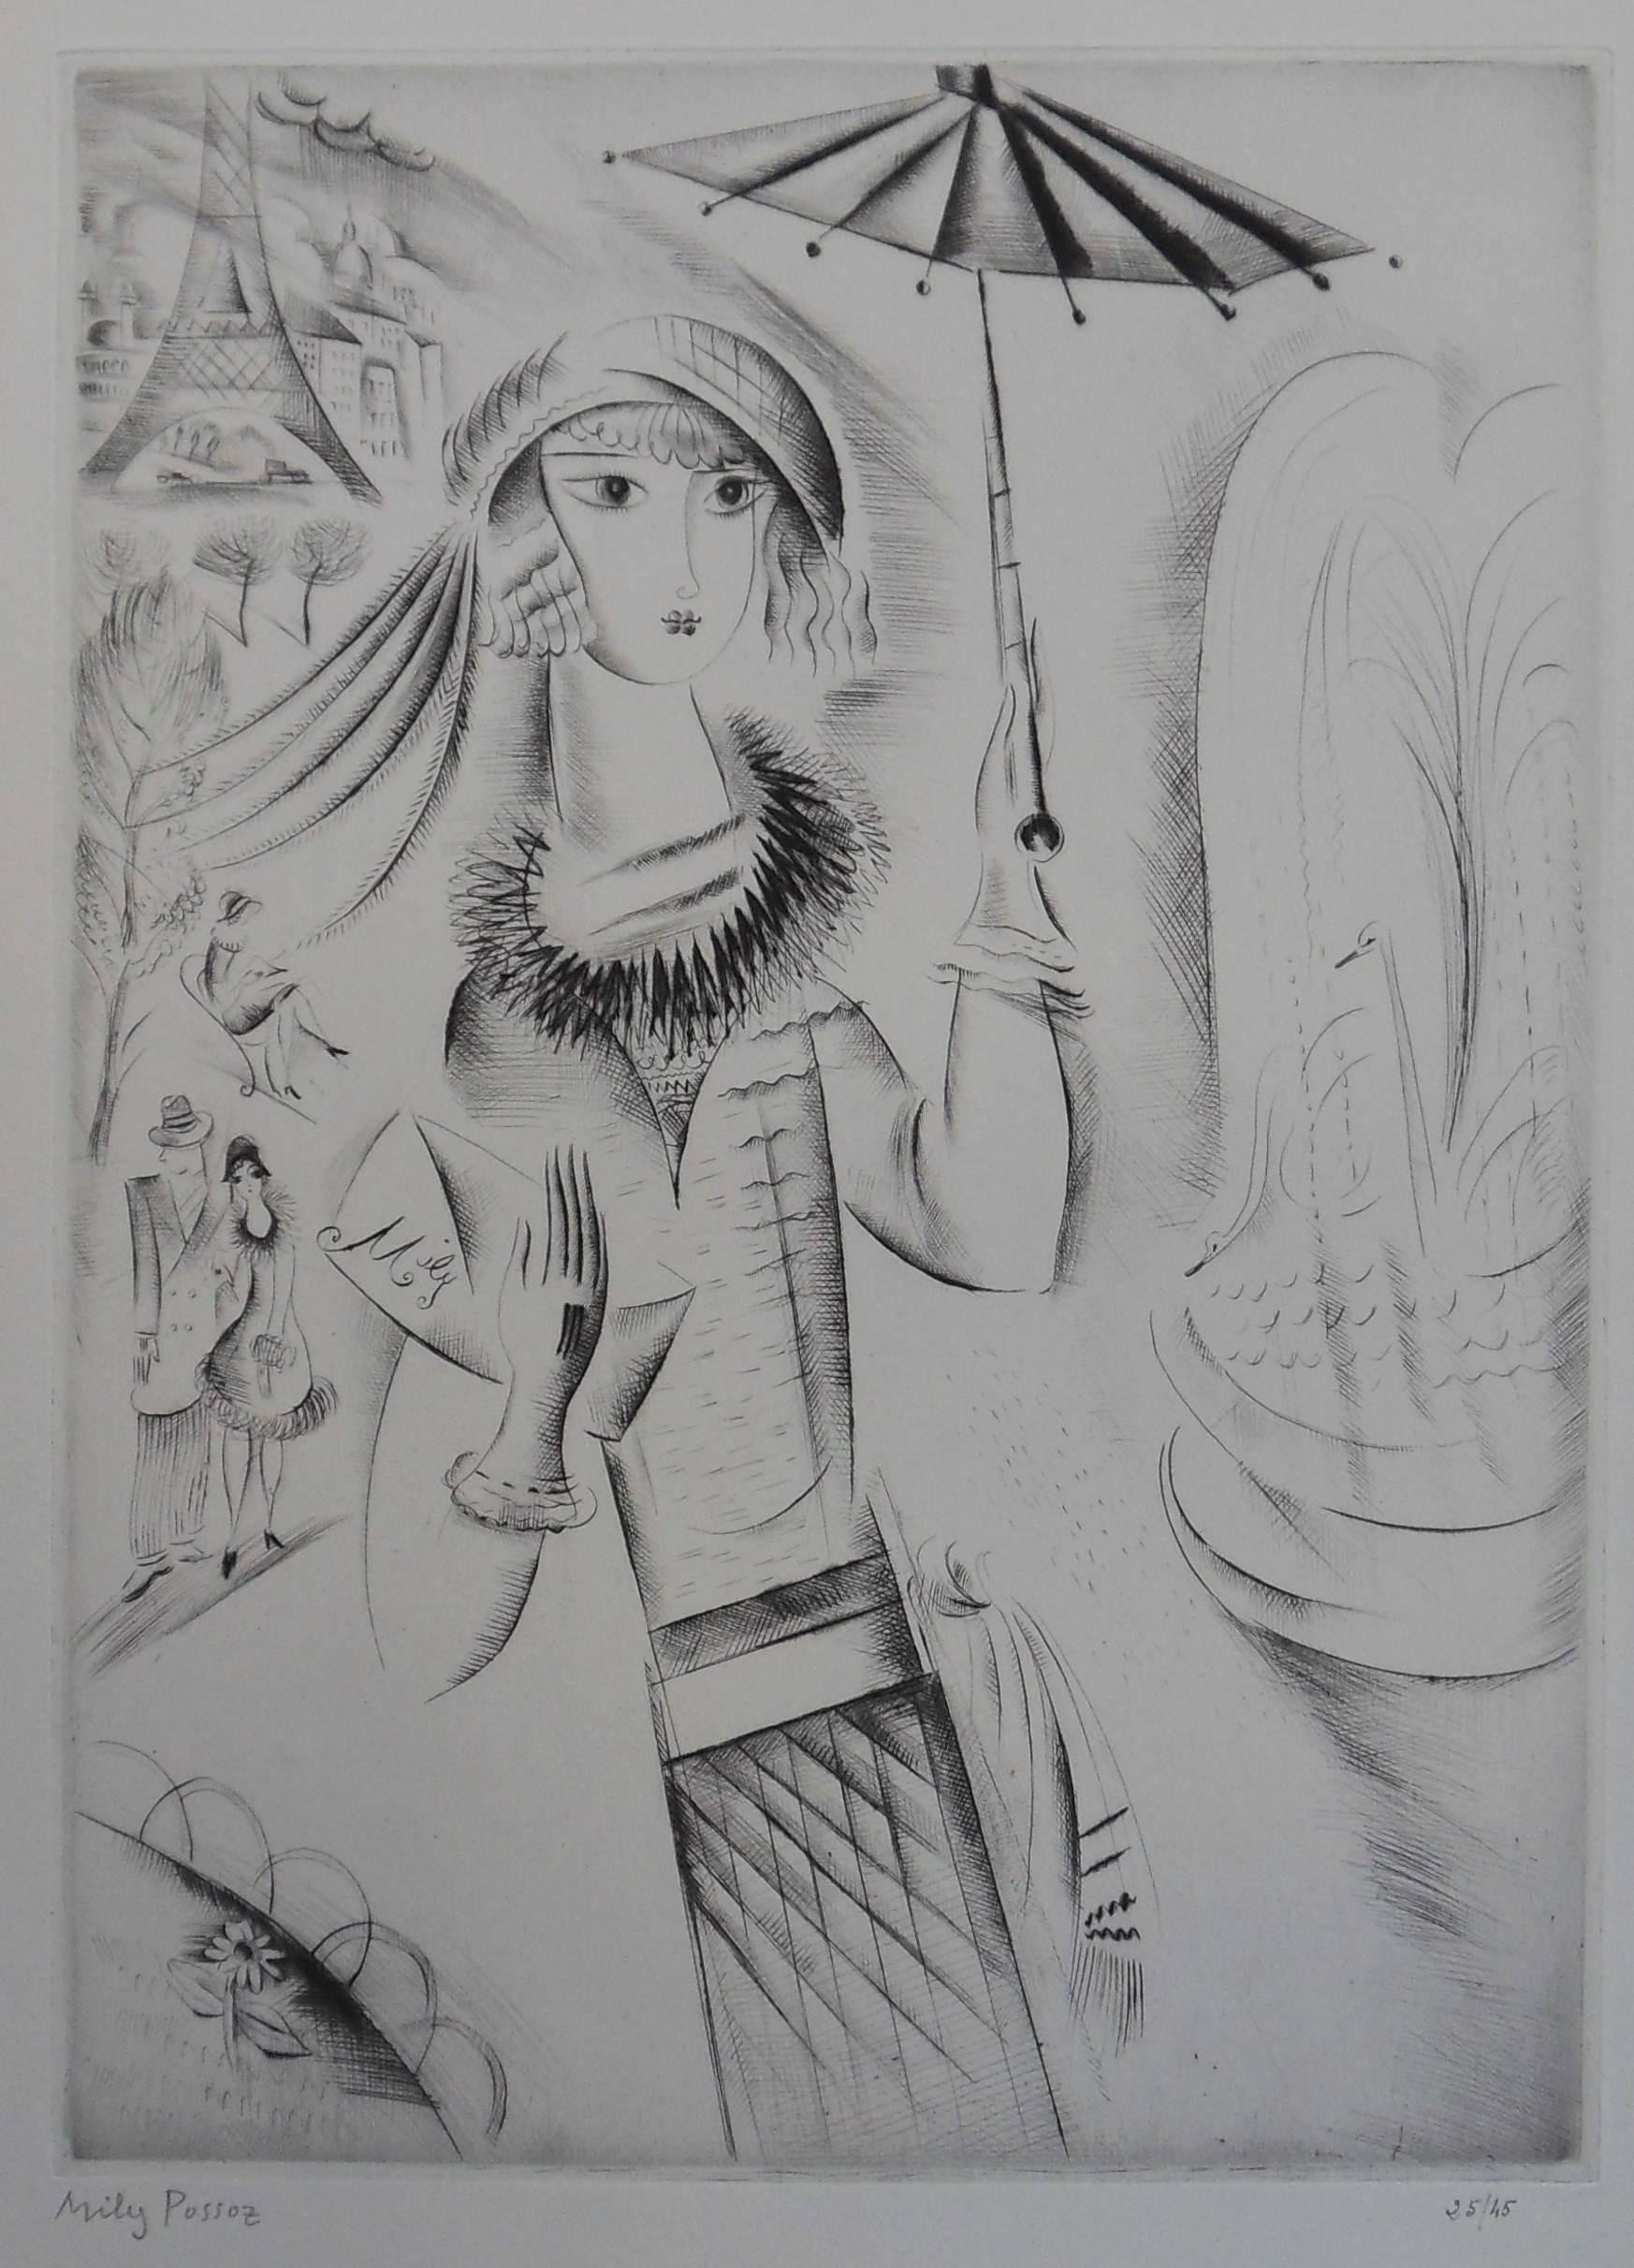 Girl with an umbrella - Etching, Handsigned - Print by Mily Possoz